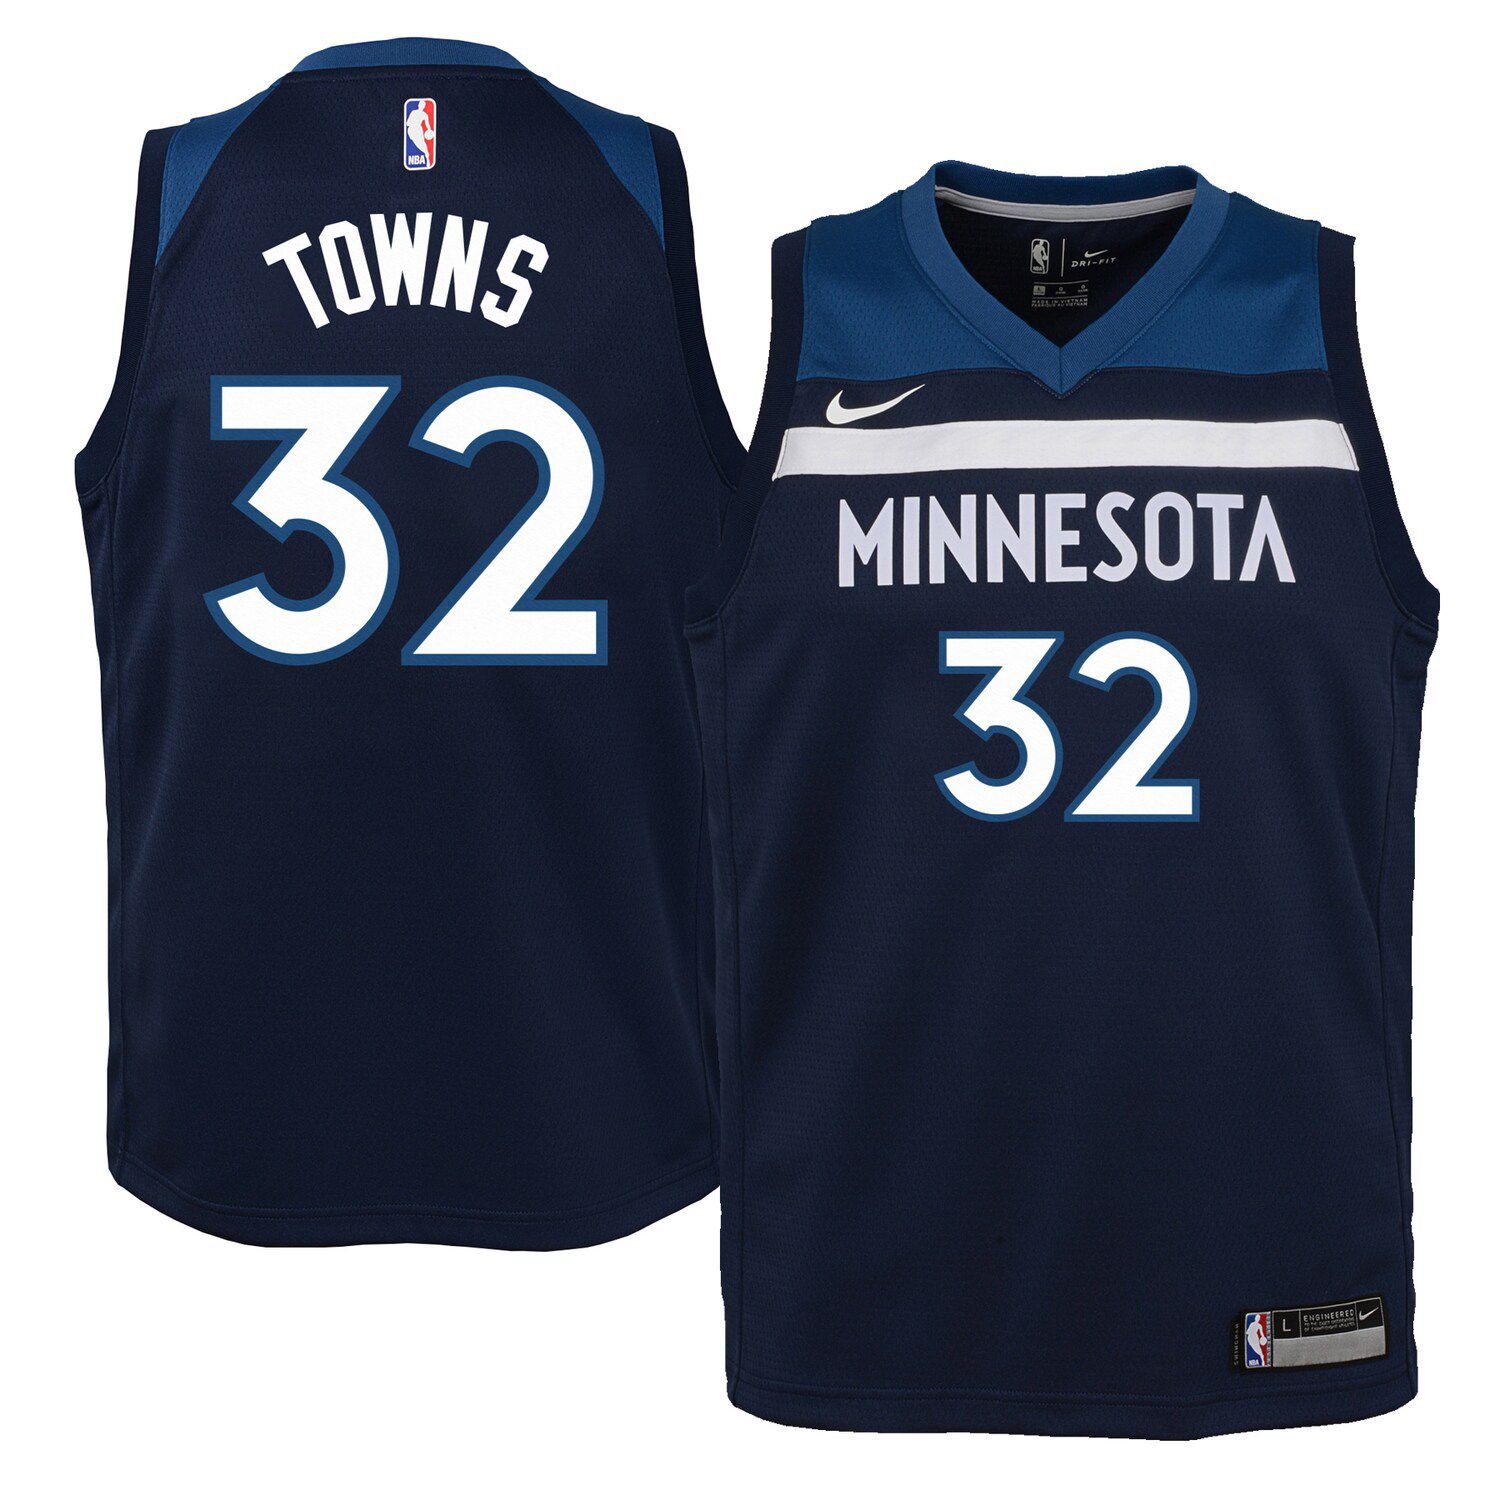 karl anthony towns jersey purple